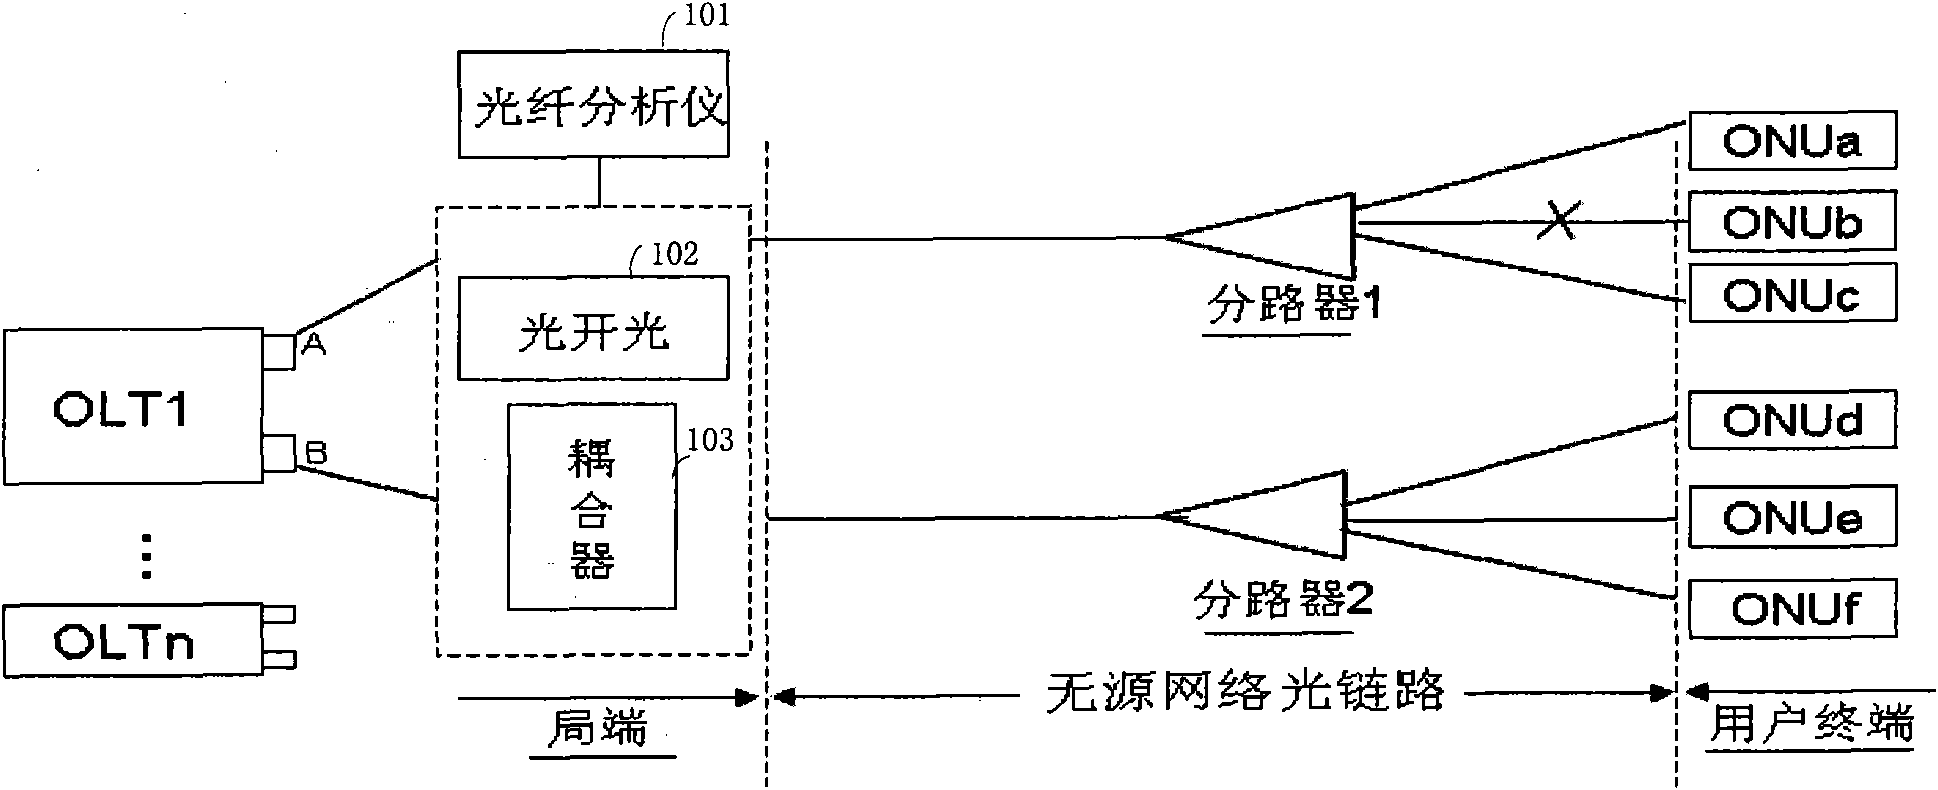 System and method for monitoring quality of optical link of passive optical network